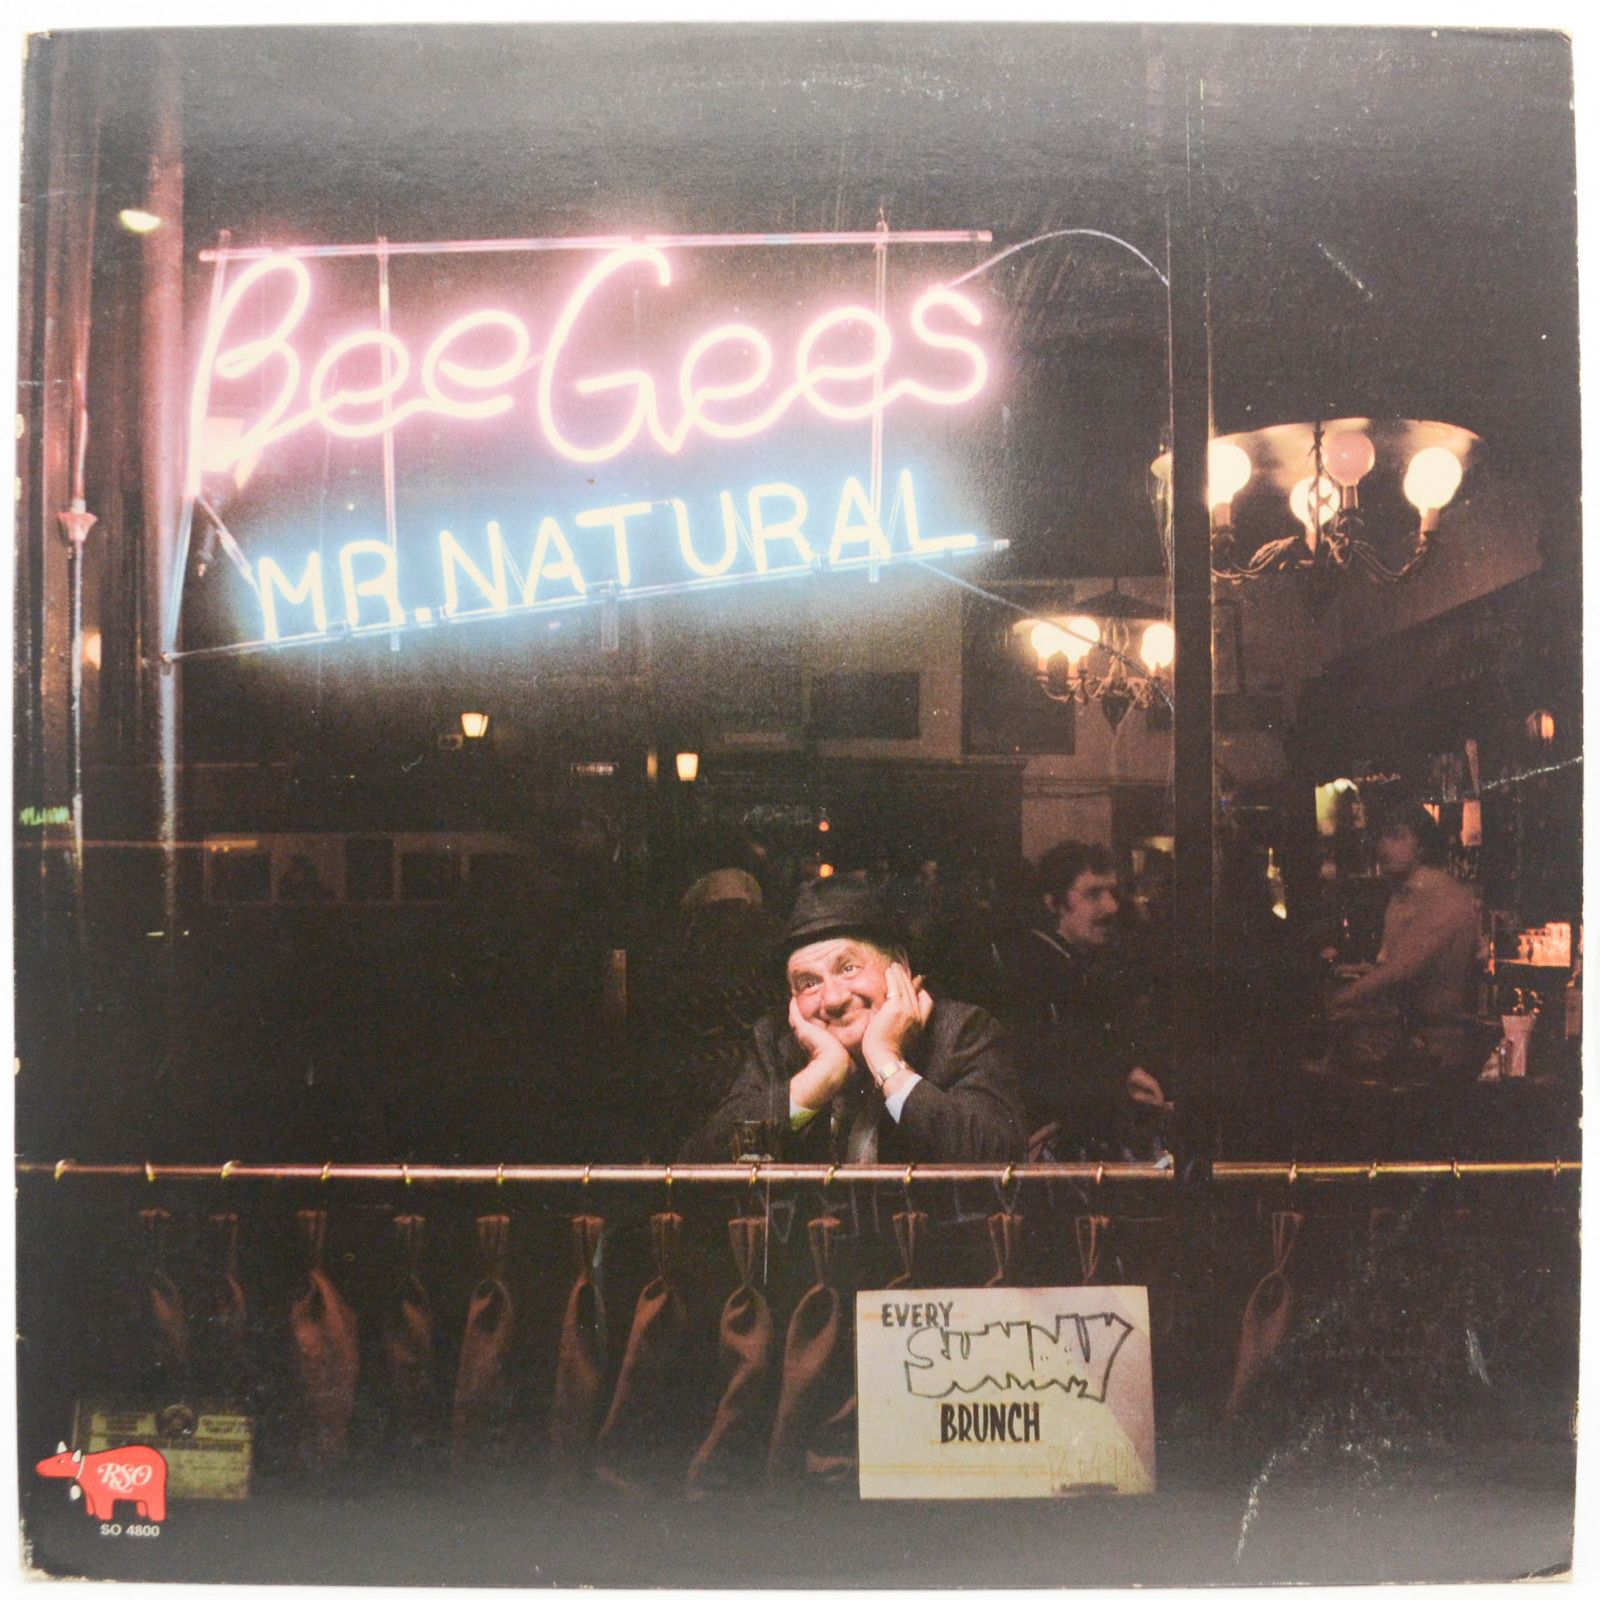 Bee Gees — Mr. Natural (USA), 1974